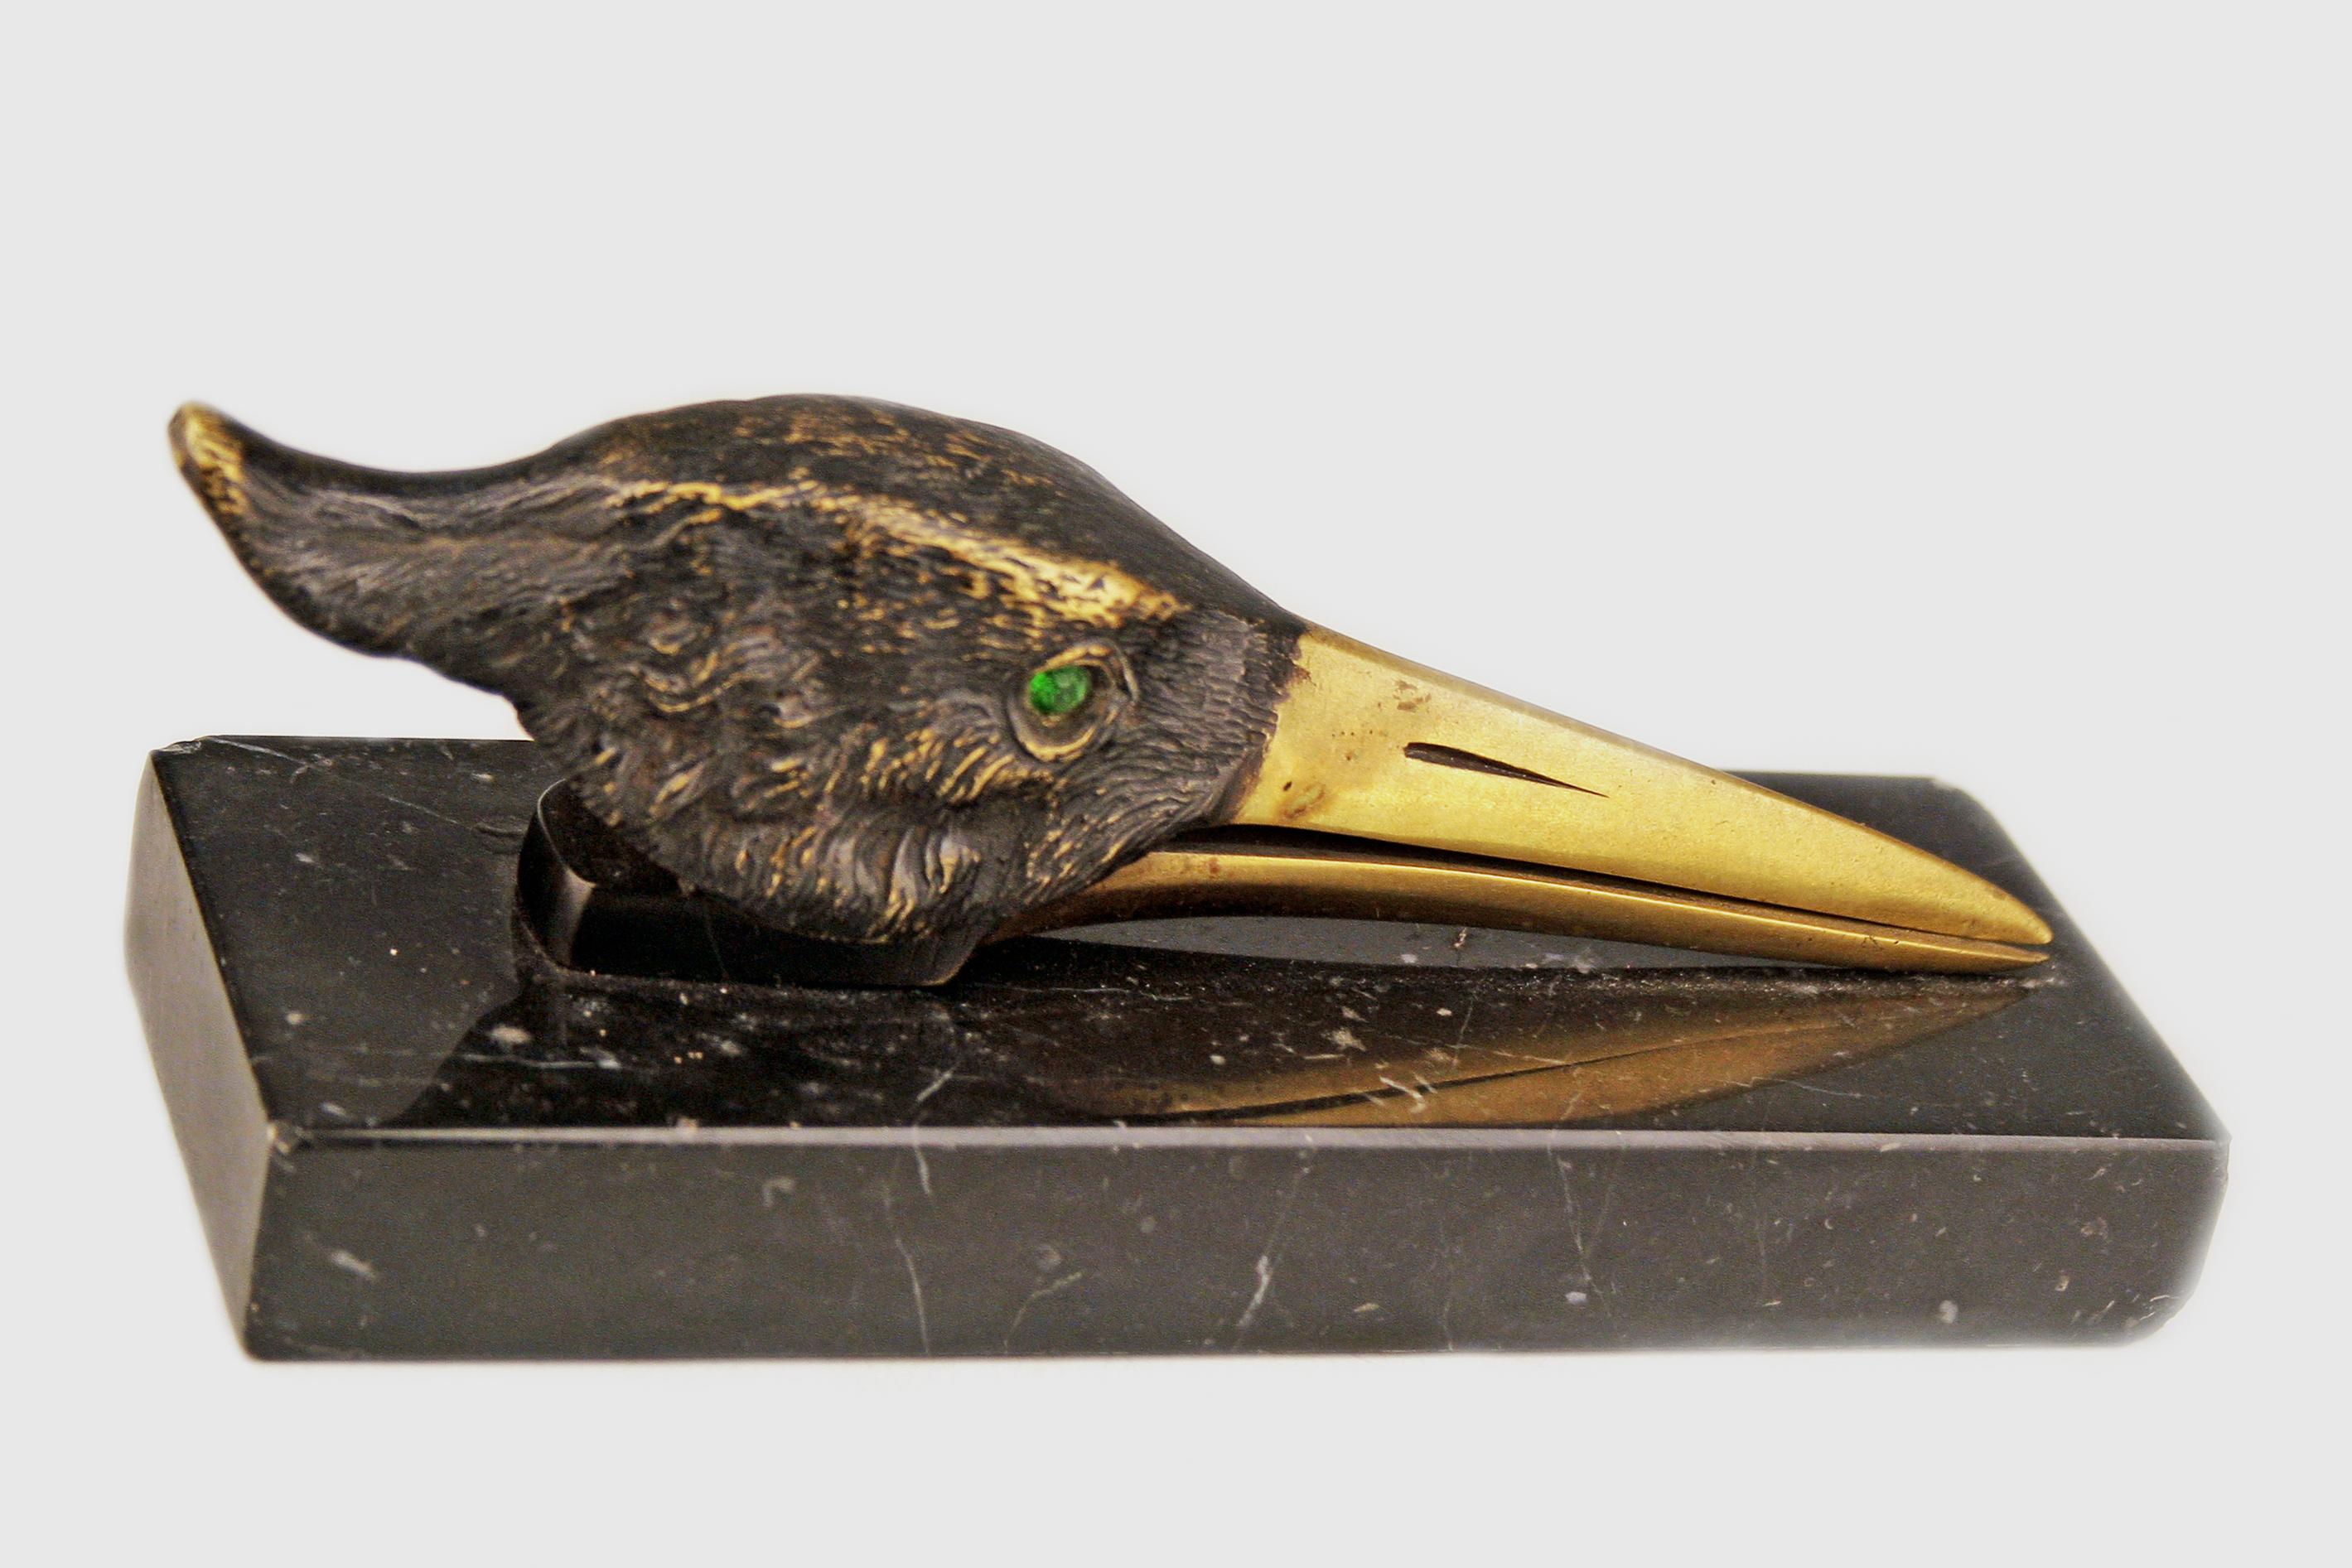 Art Déco english patinated bronze papper clip/letter holder depicting a stork head with marble plinth

By: unknown
Material: bronze, marble, copper, metal
Technique: cast, patinated, painted, metalwork, molded
Dimensions: 5 in x 2 in x 2.5 in
Date: